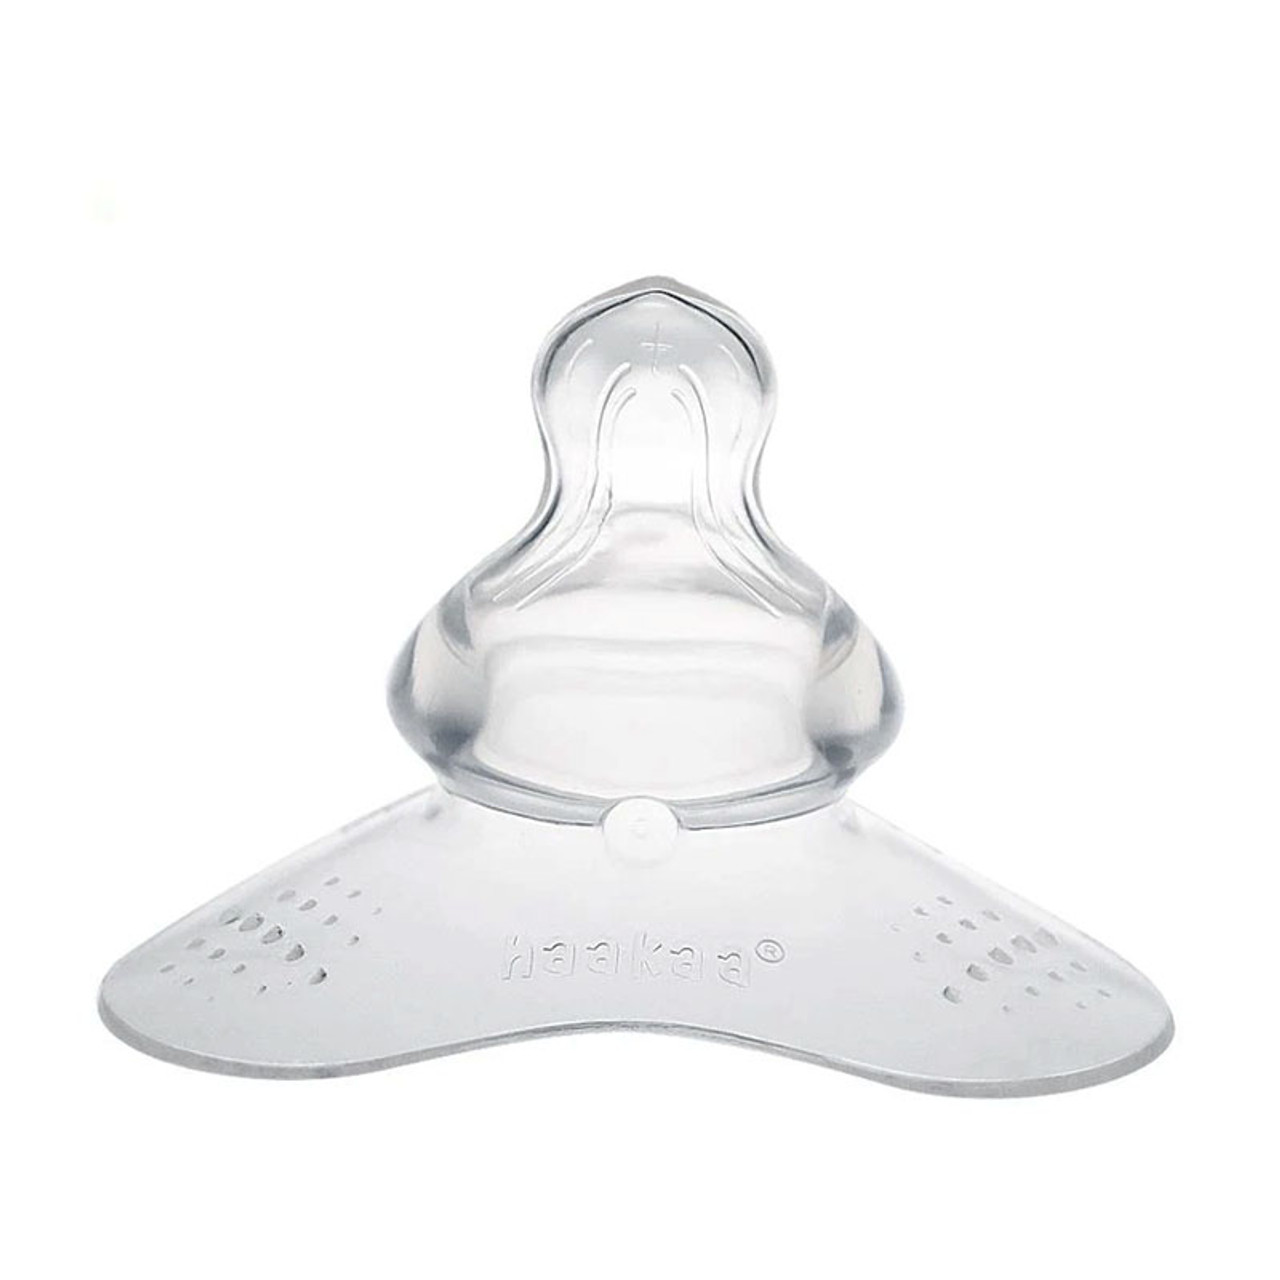 https://cdn11.bigcommerce.com/s-5rdxj17/images/stencil/1280x1280/products/987/3356/Haakaa_Breastfeeding_Nipple_Shield_with_Orthodontic_Teat_Triangle_Base__56532__04125.1597230989.jpg?c=2